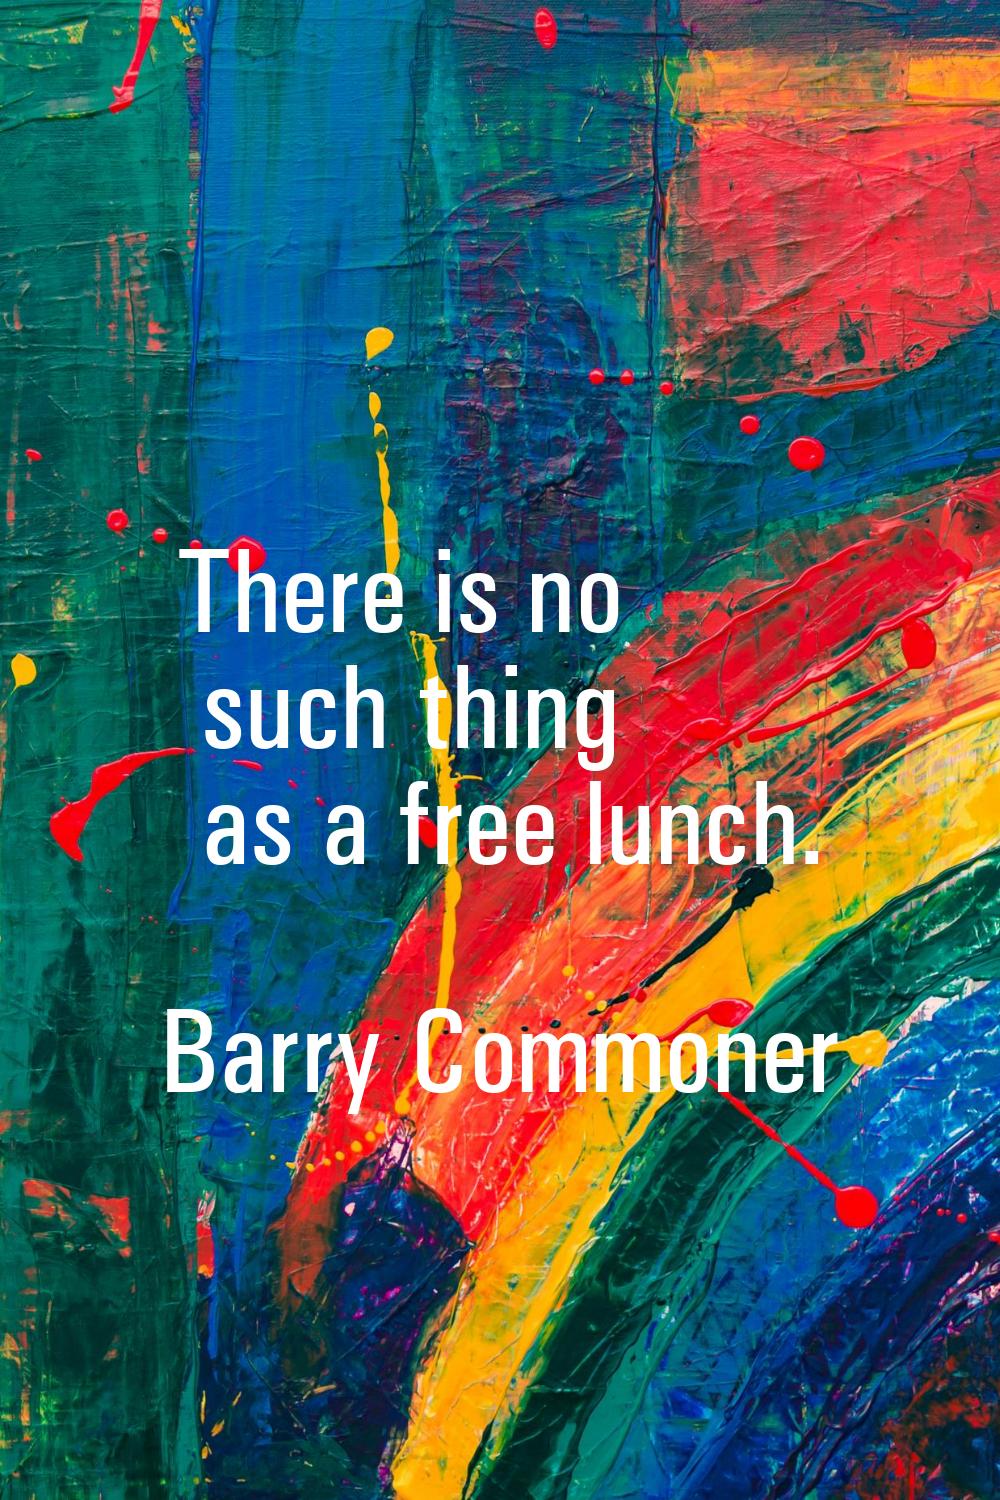 There is no such thing as a free lunch.